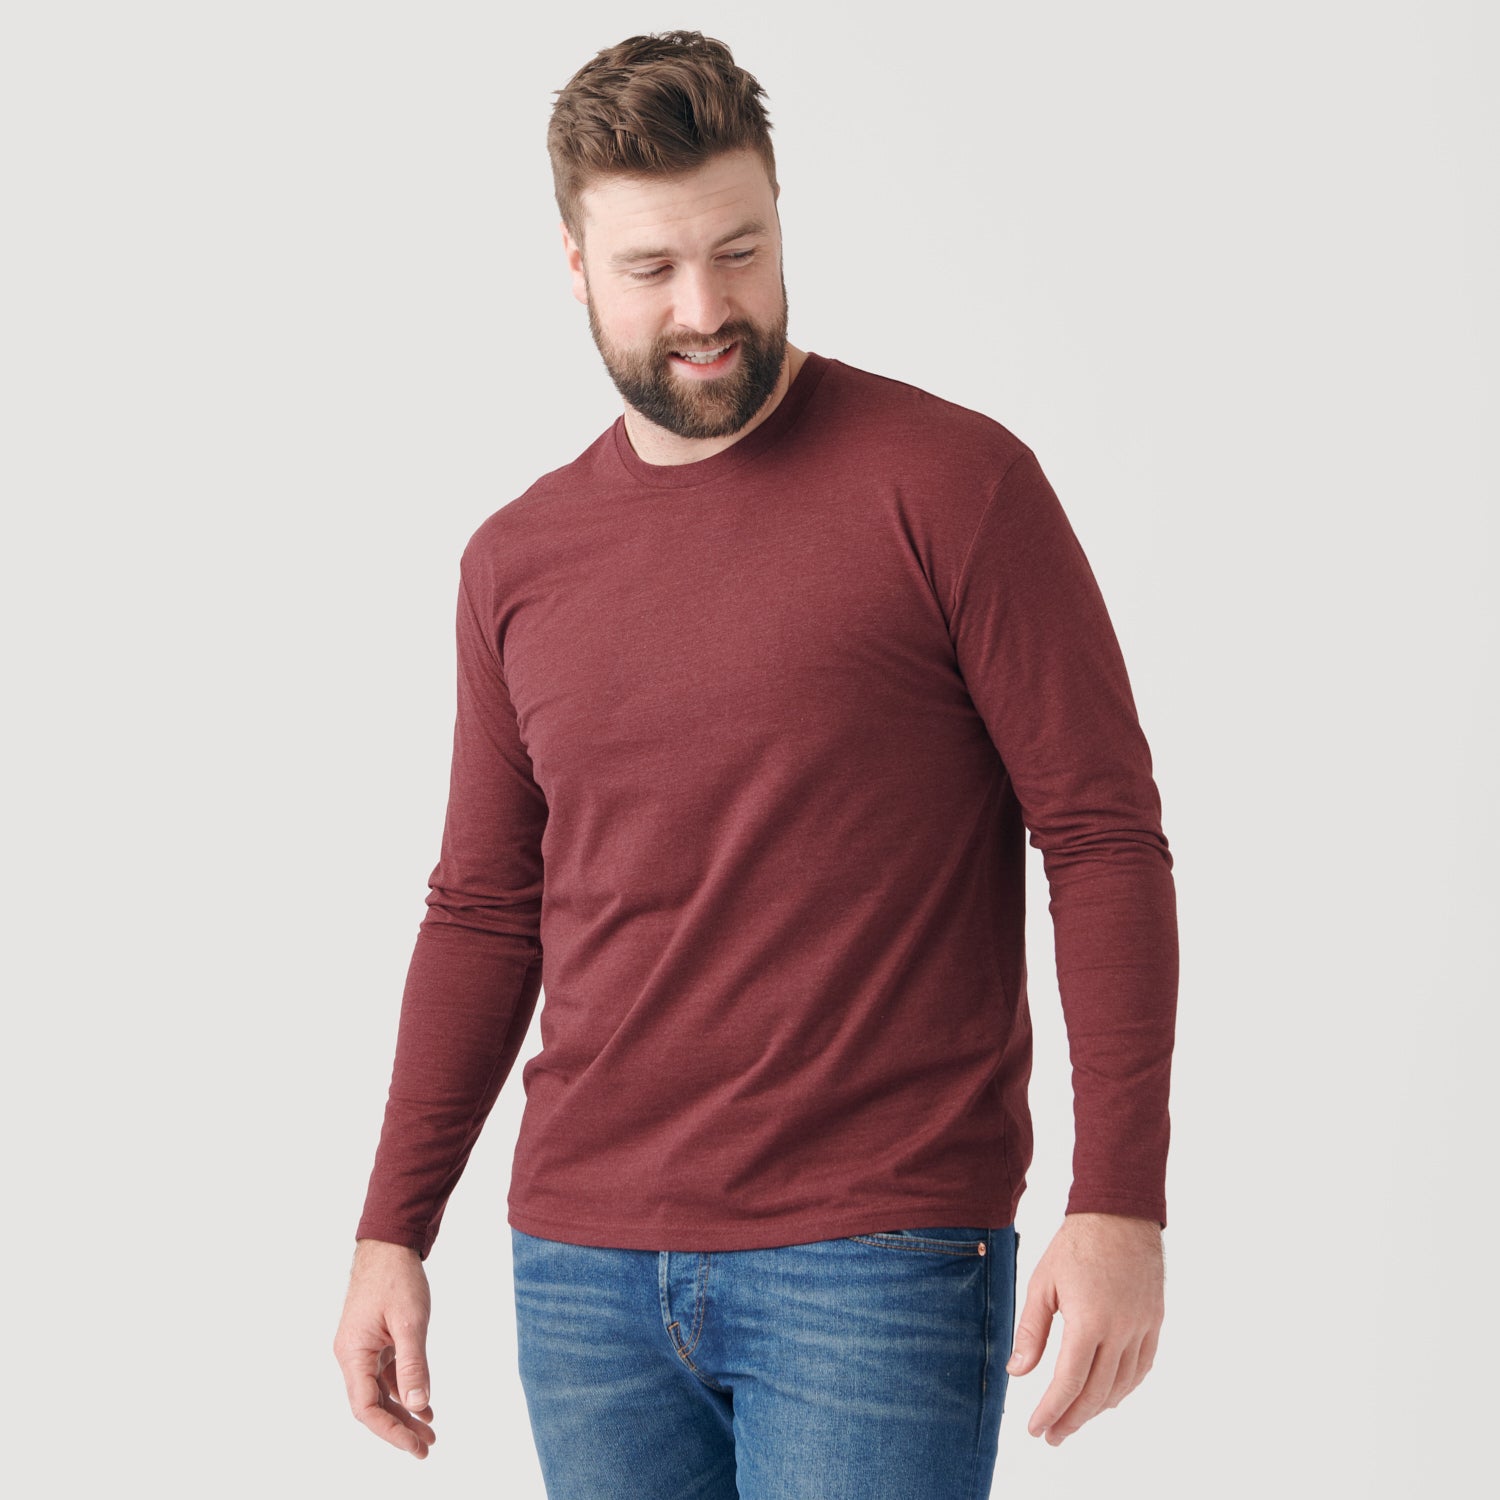 Stanley Men's Thermal Crew Shirt with Long Sleeves & Pocket, Burgundy Heather, X-Large